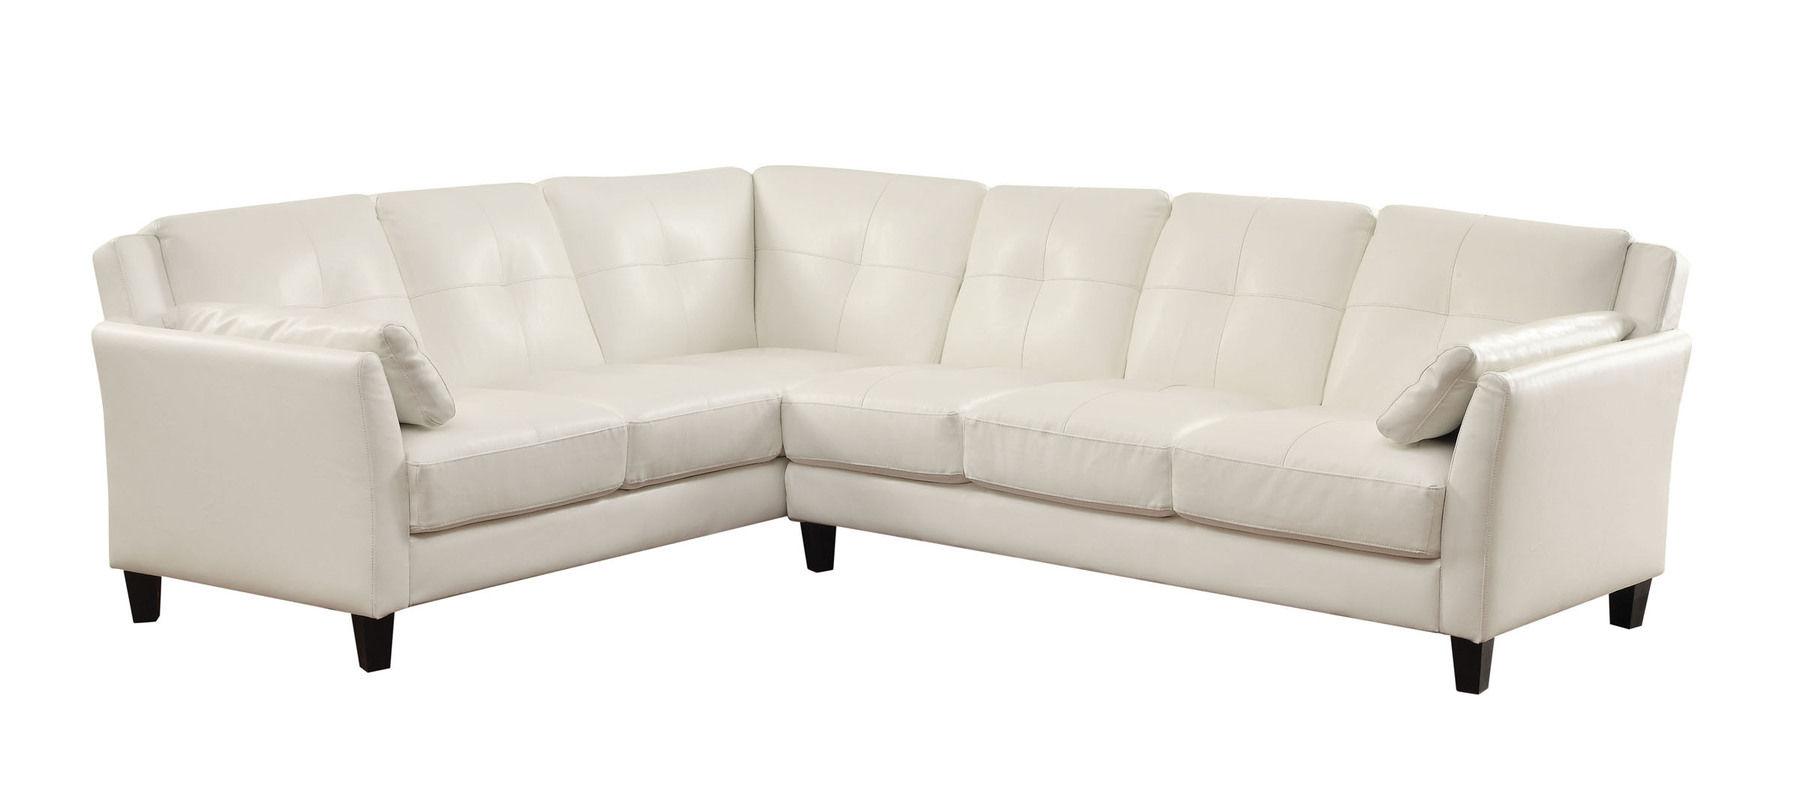 Contemporary Sectional Sofa PEEVER CM6268WH-SET CM6268WH-SET in White Leatherette